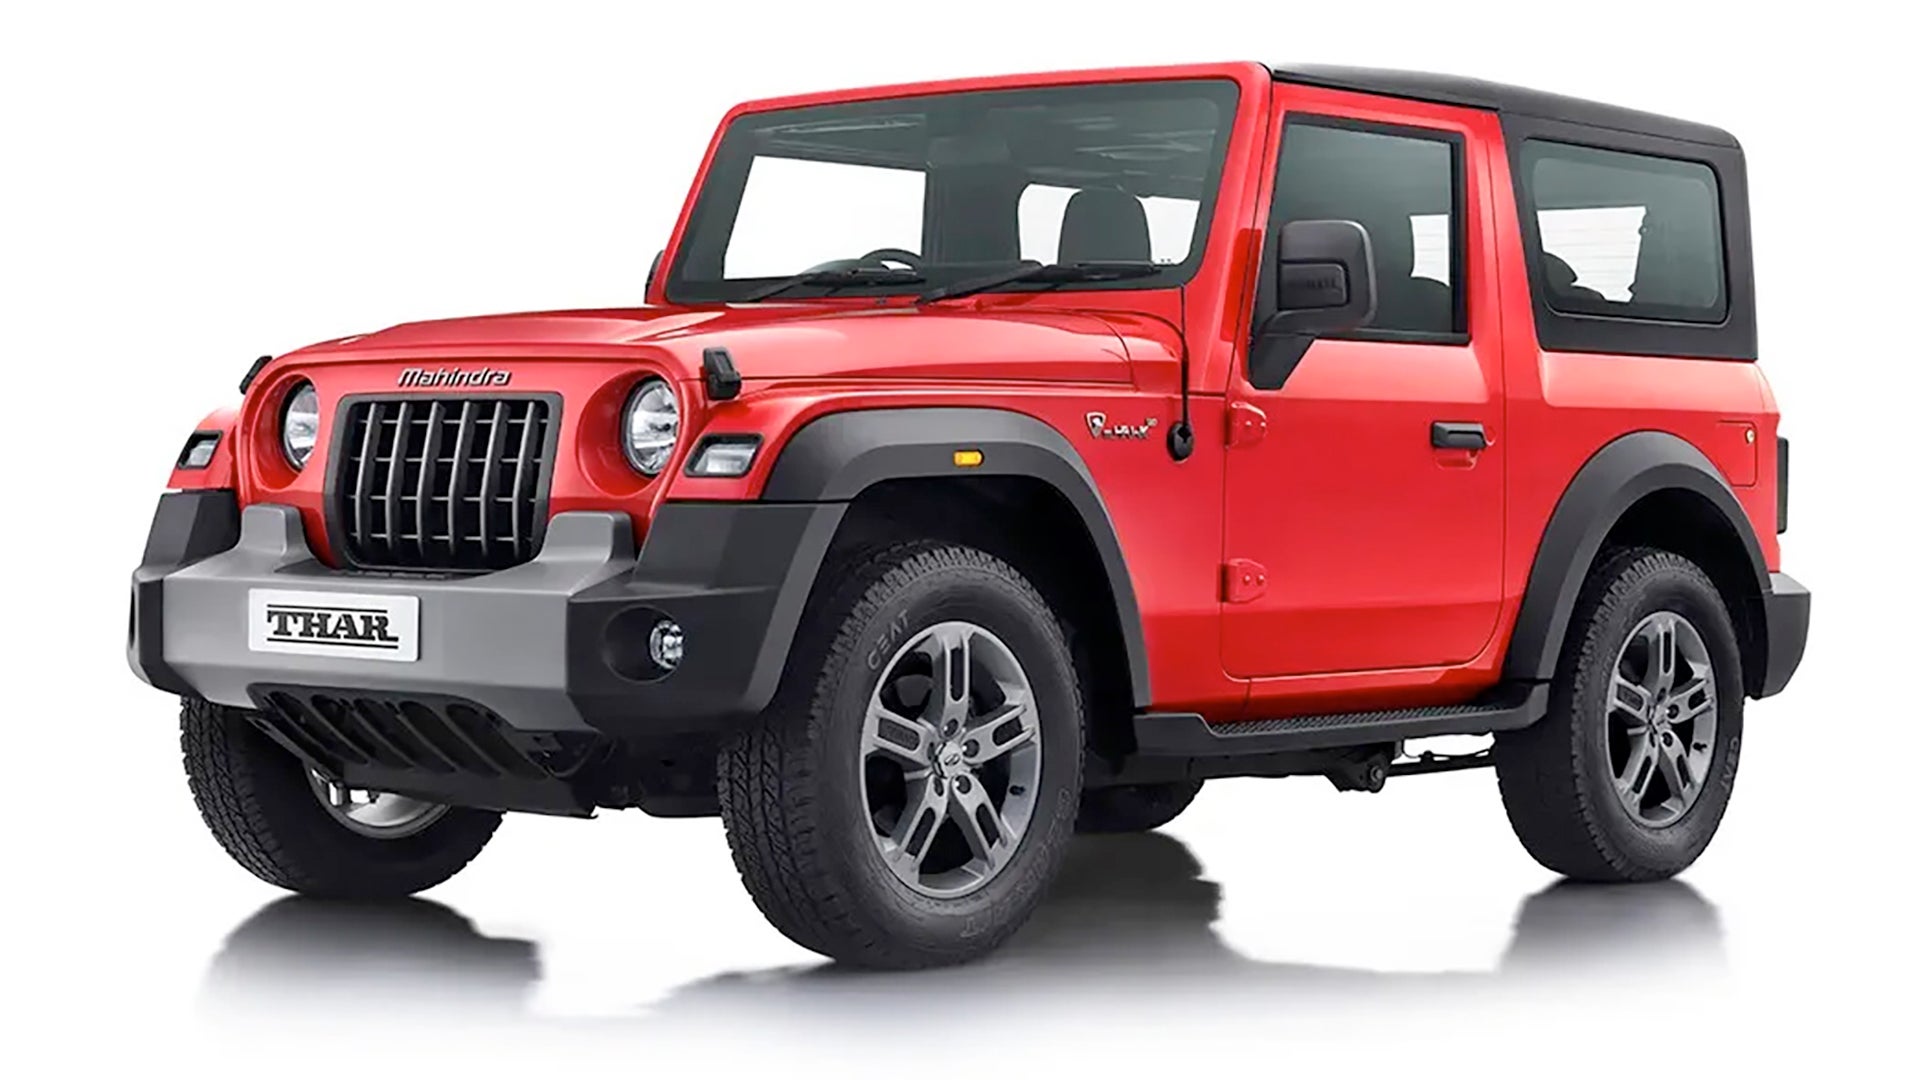 The Mahindra Thar Is India's New Totally Not a Jeep Wrangler